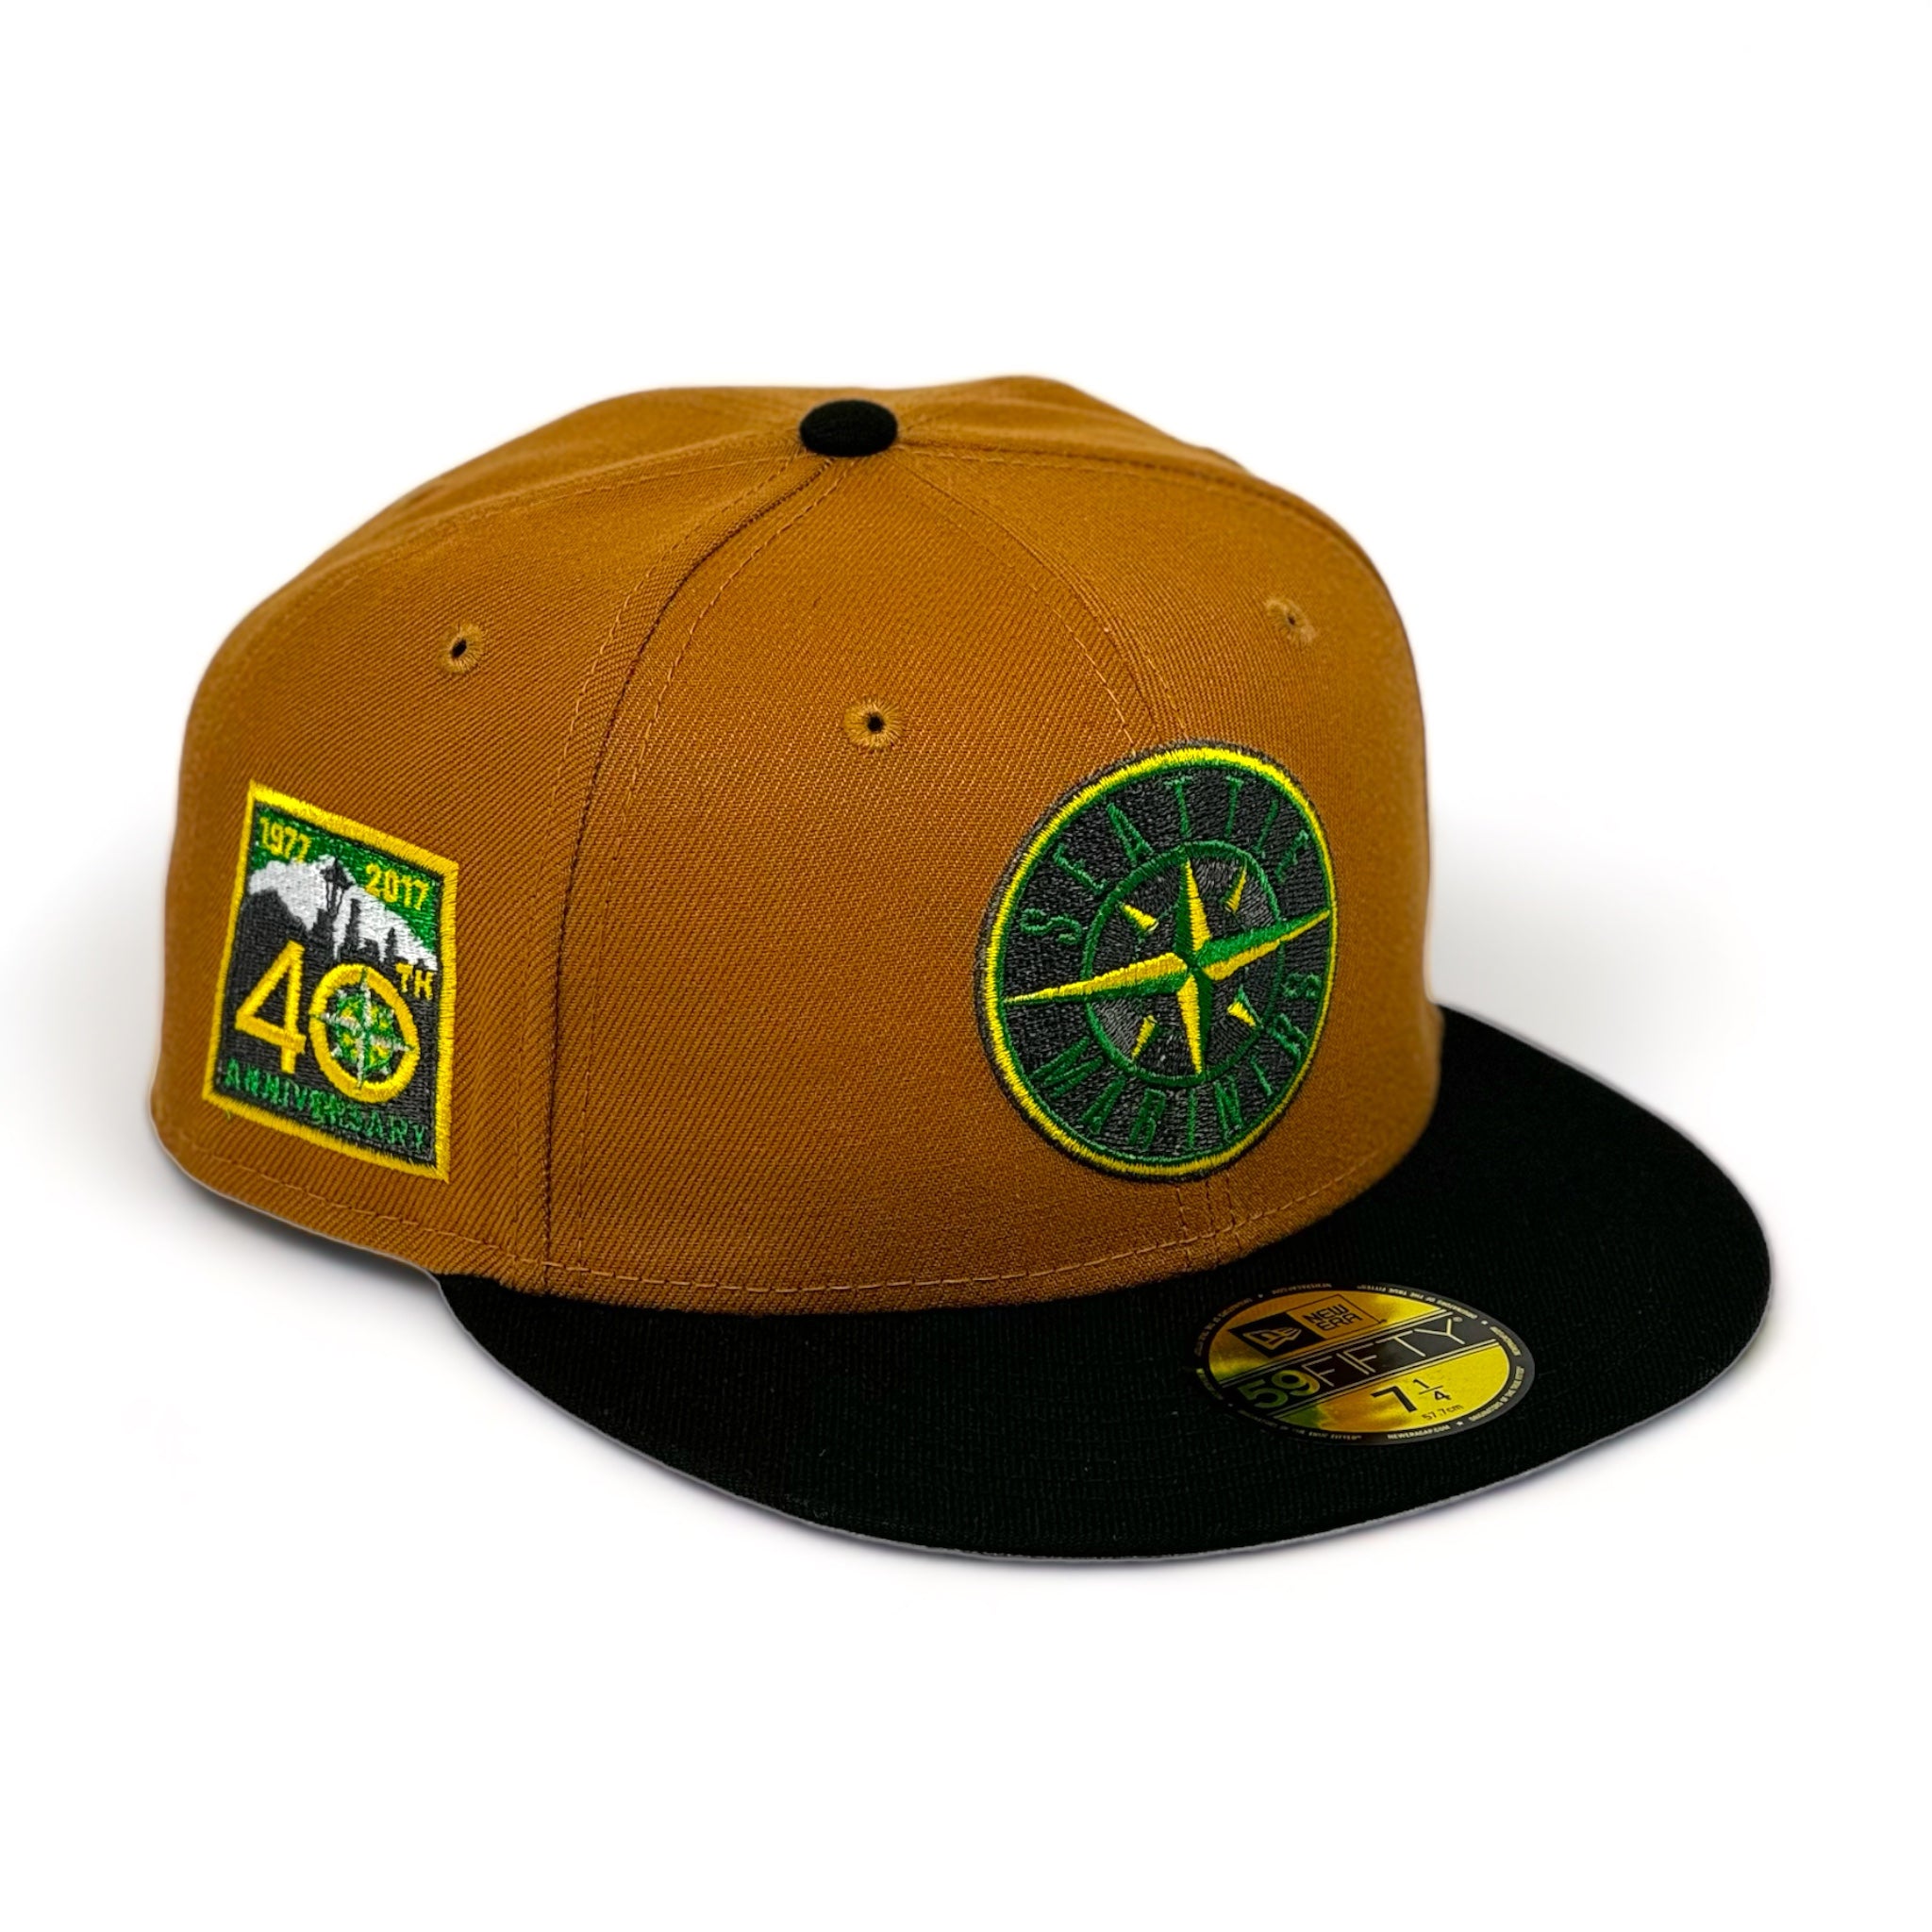 SEATTLE MARINERS (BRONZE) (40TH ANN) NEW ERA 59FIFTY FITTED